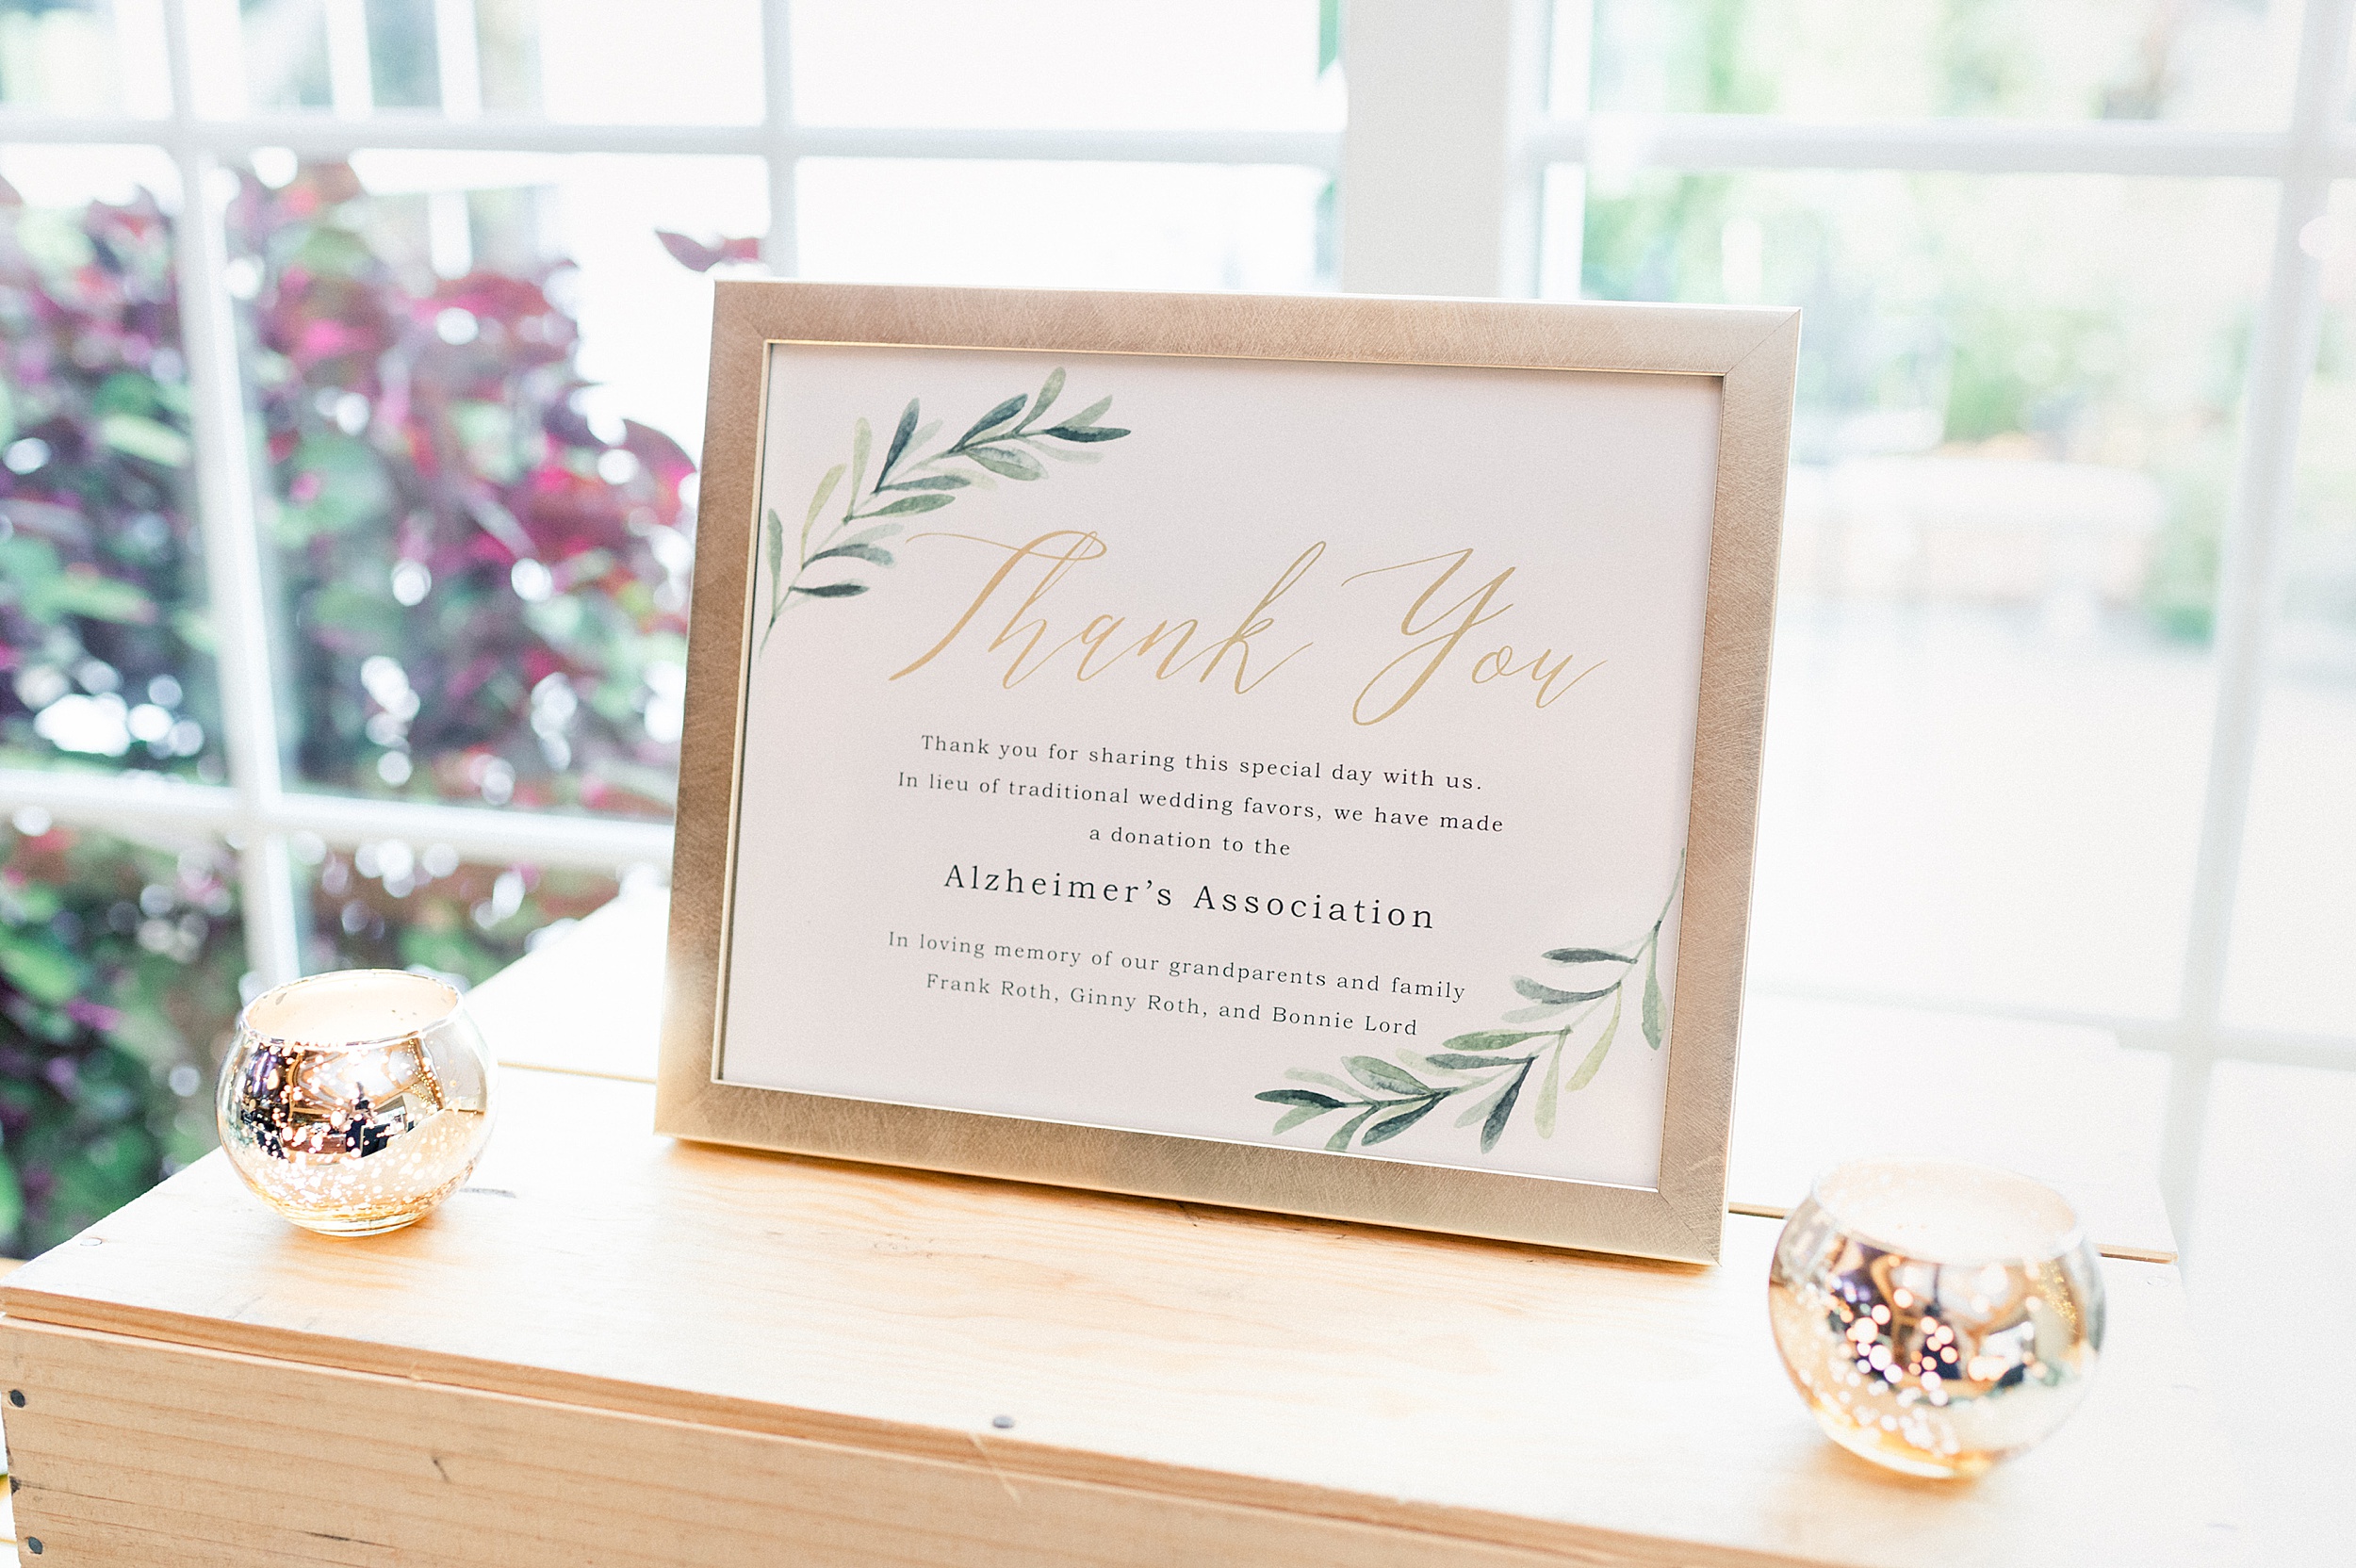 donation sign at wedding for guest favors